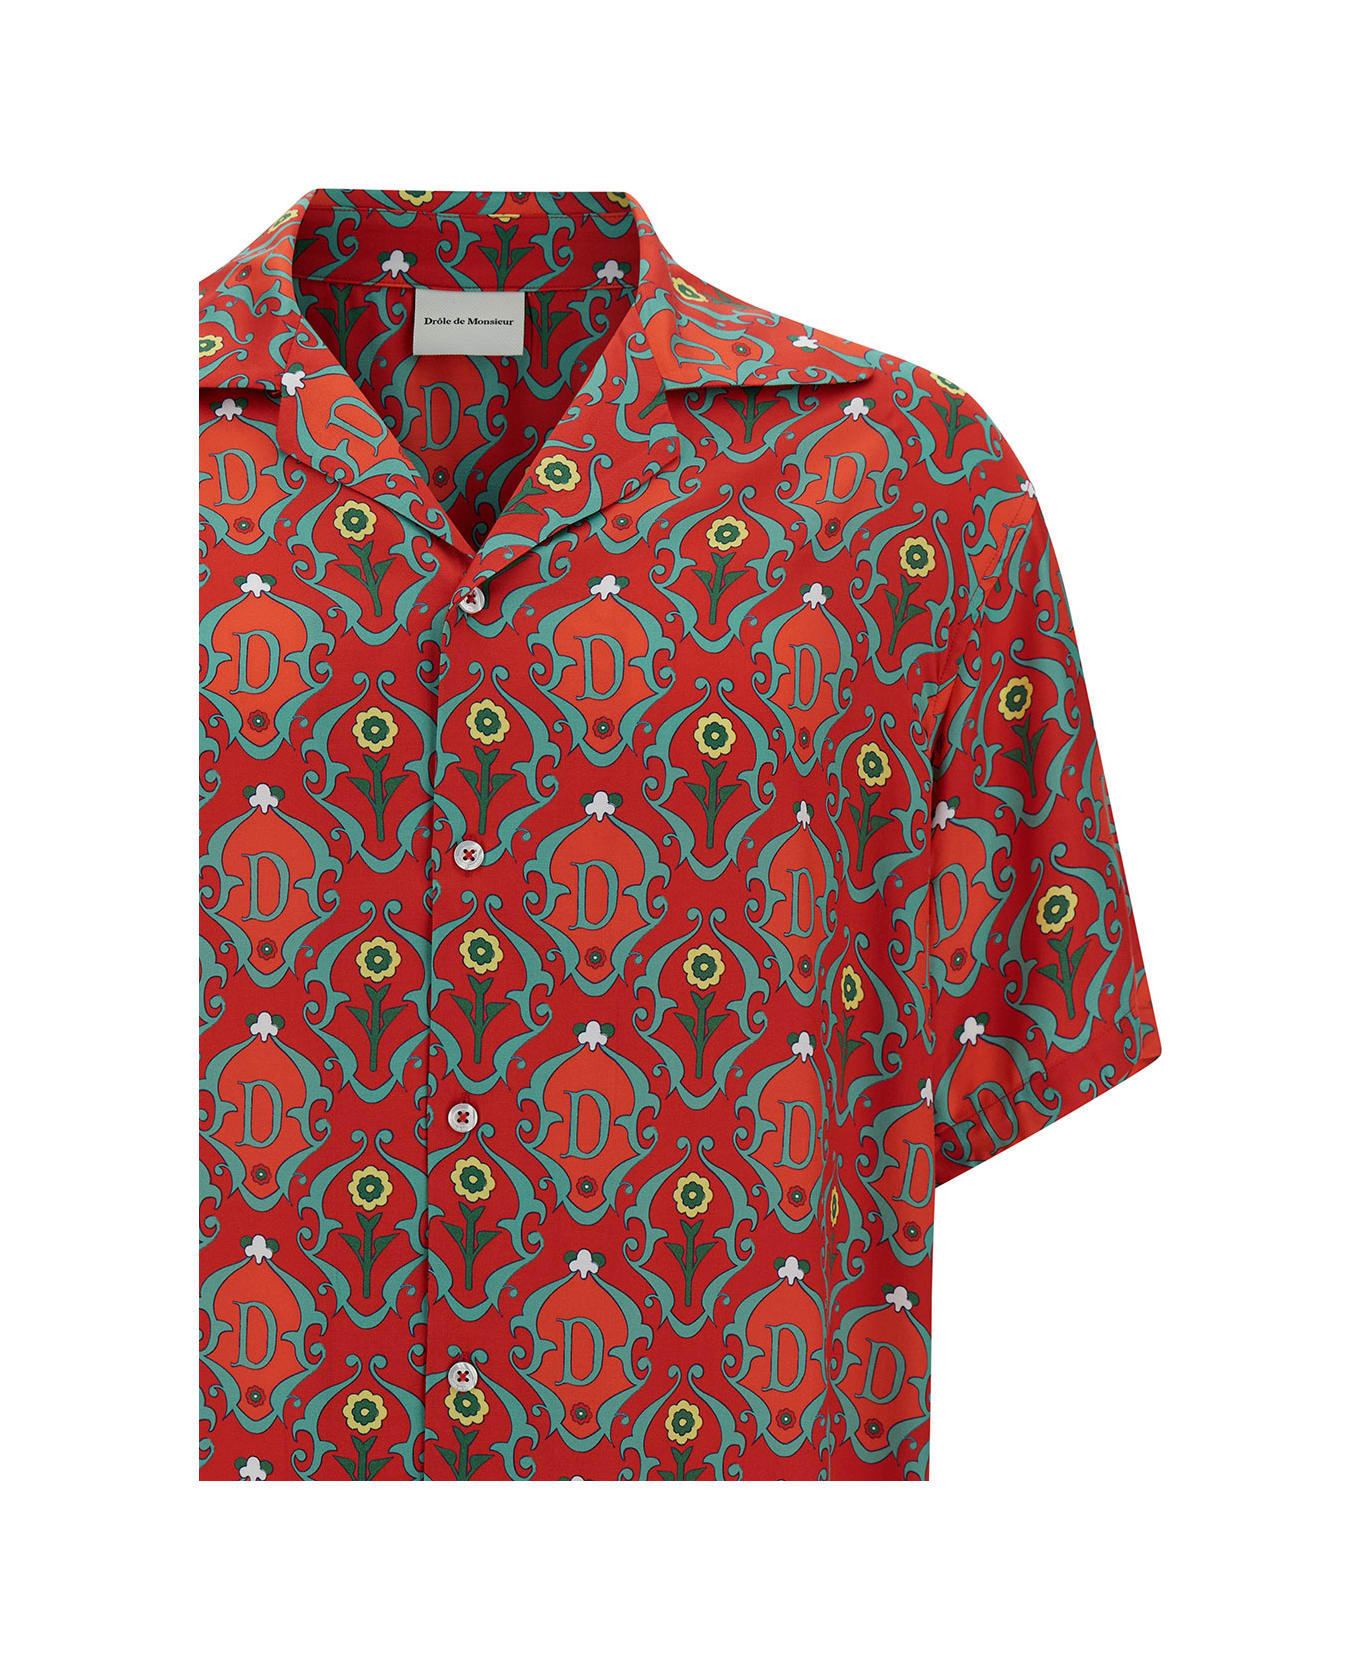 Drôle de Monsieur Red Bowling Shirt With Ornements Print In Satin Man - Red